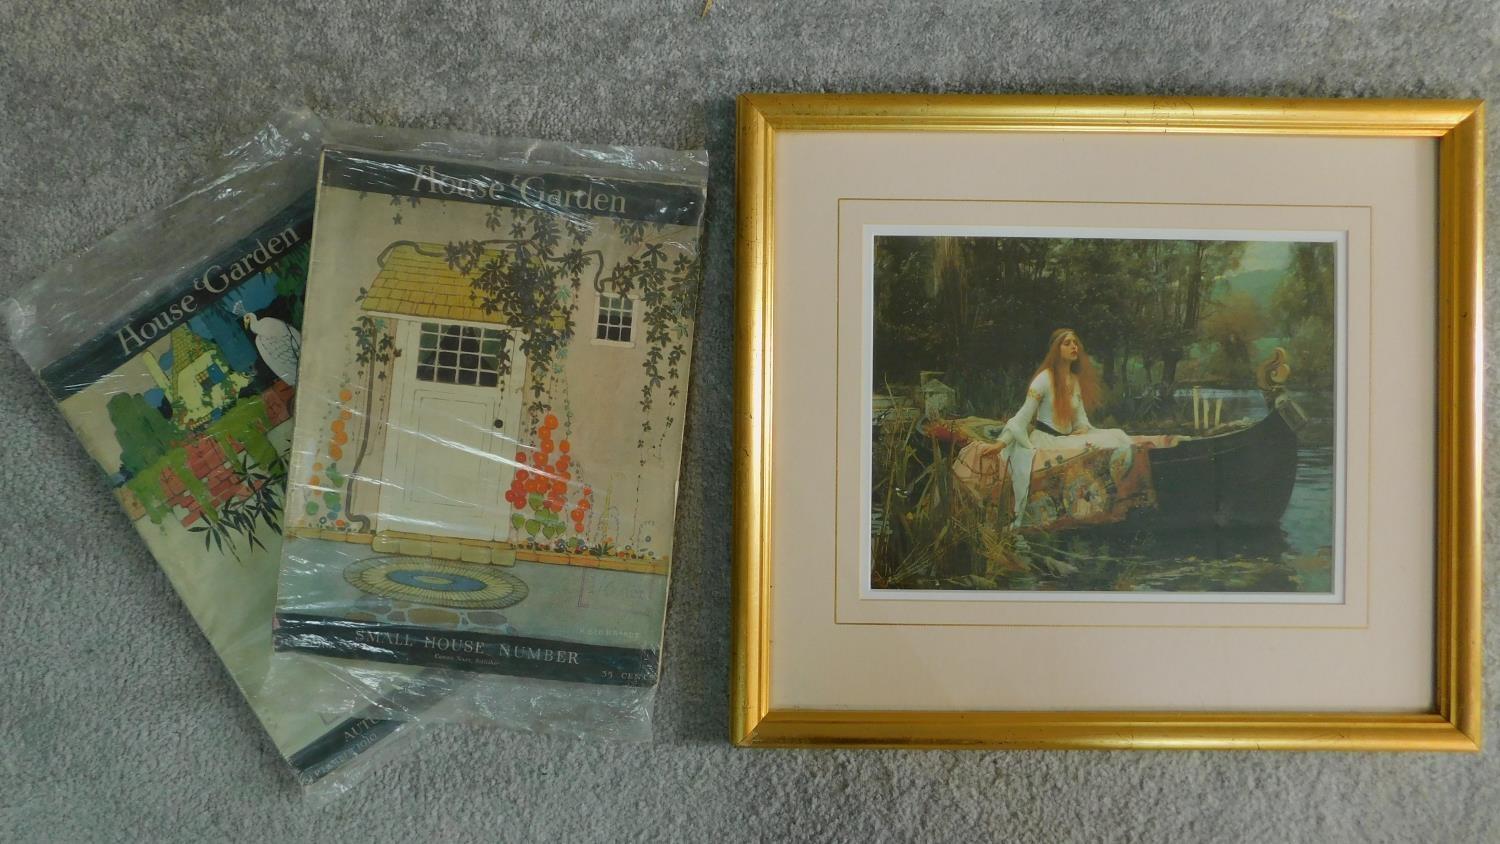 Two late early Art Deco House Garden magazines together with a framed and glazed print. 33x25cm (